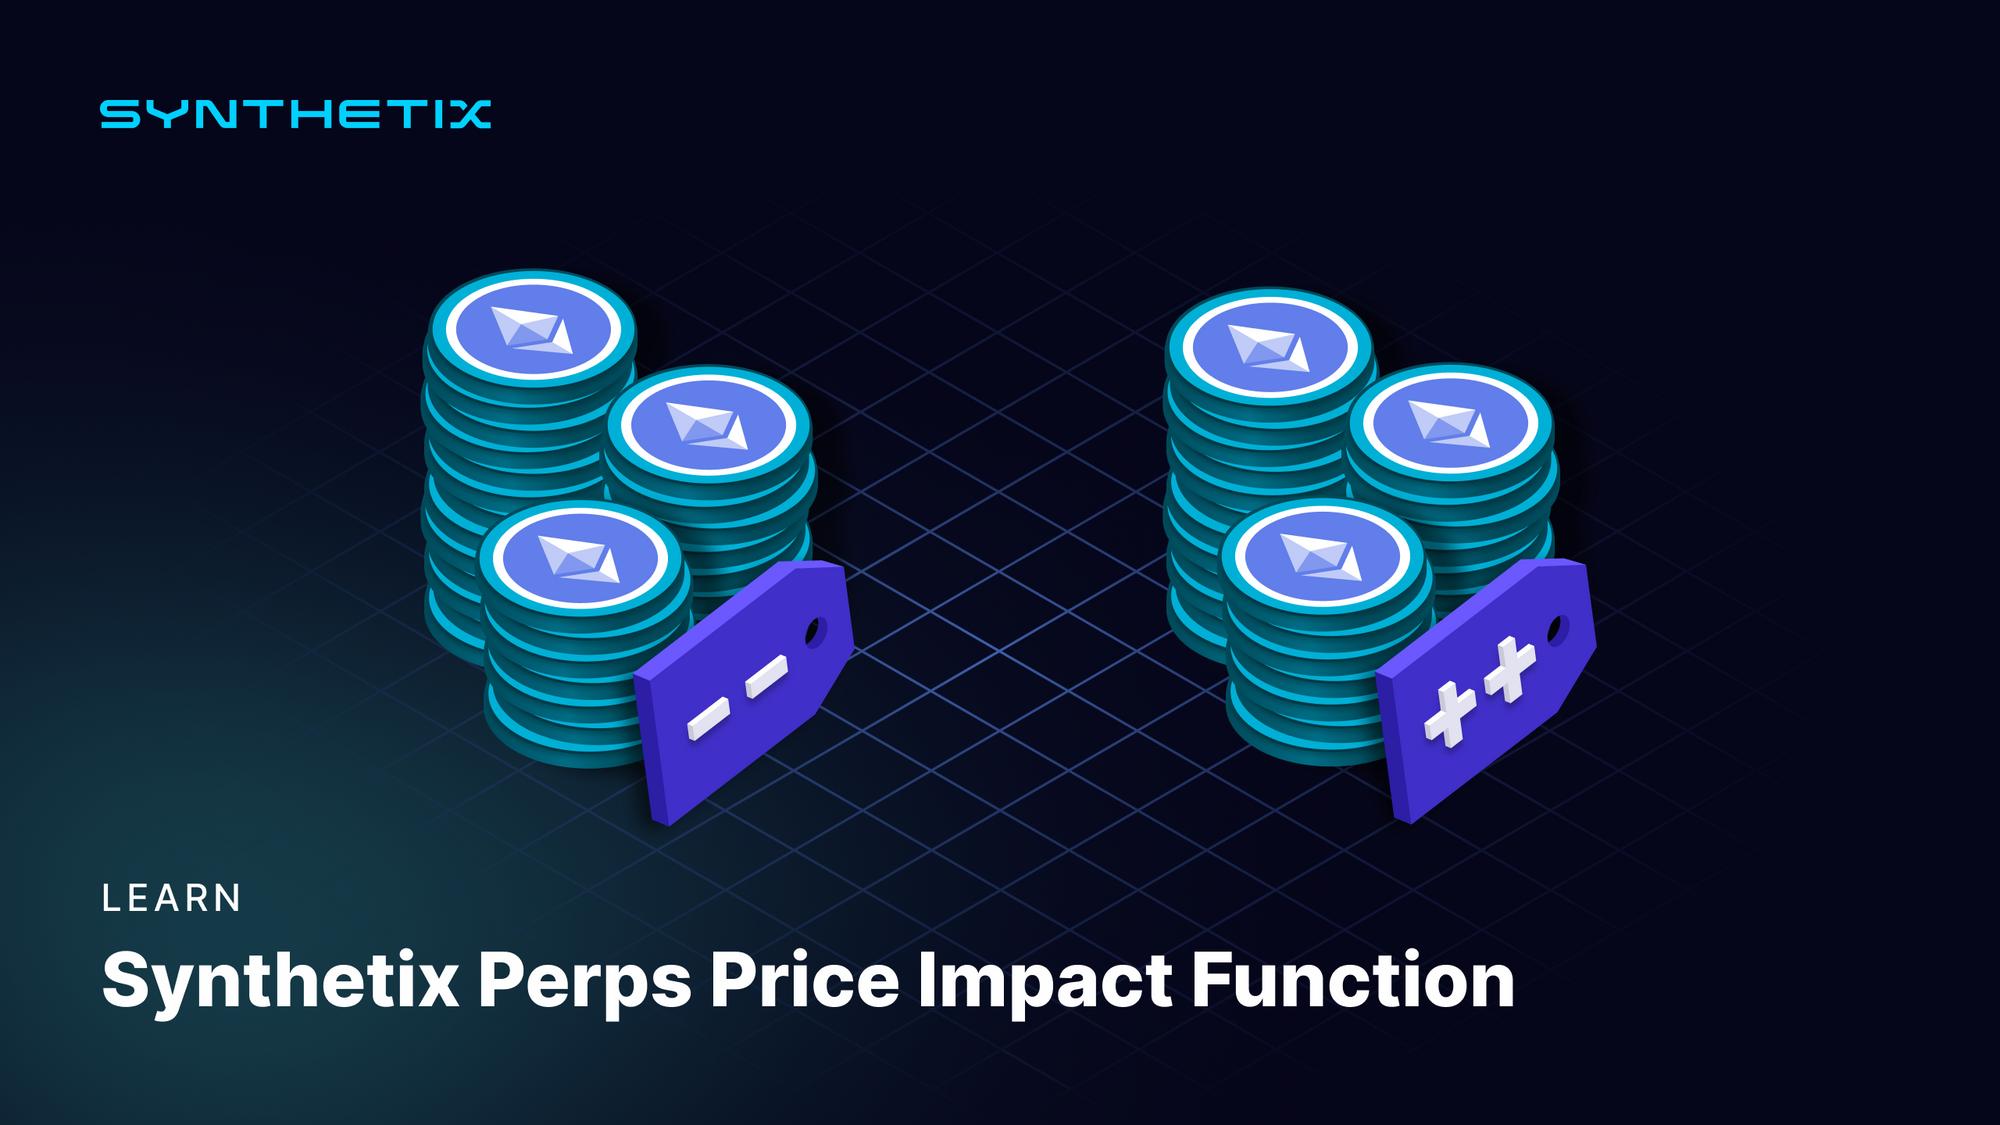 Synthetix Perps Price Impact Function